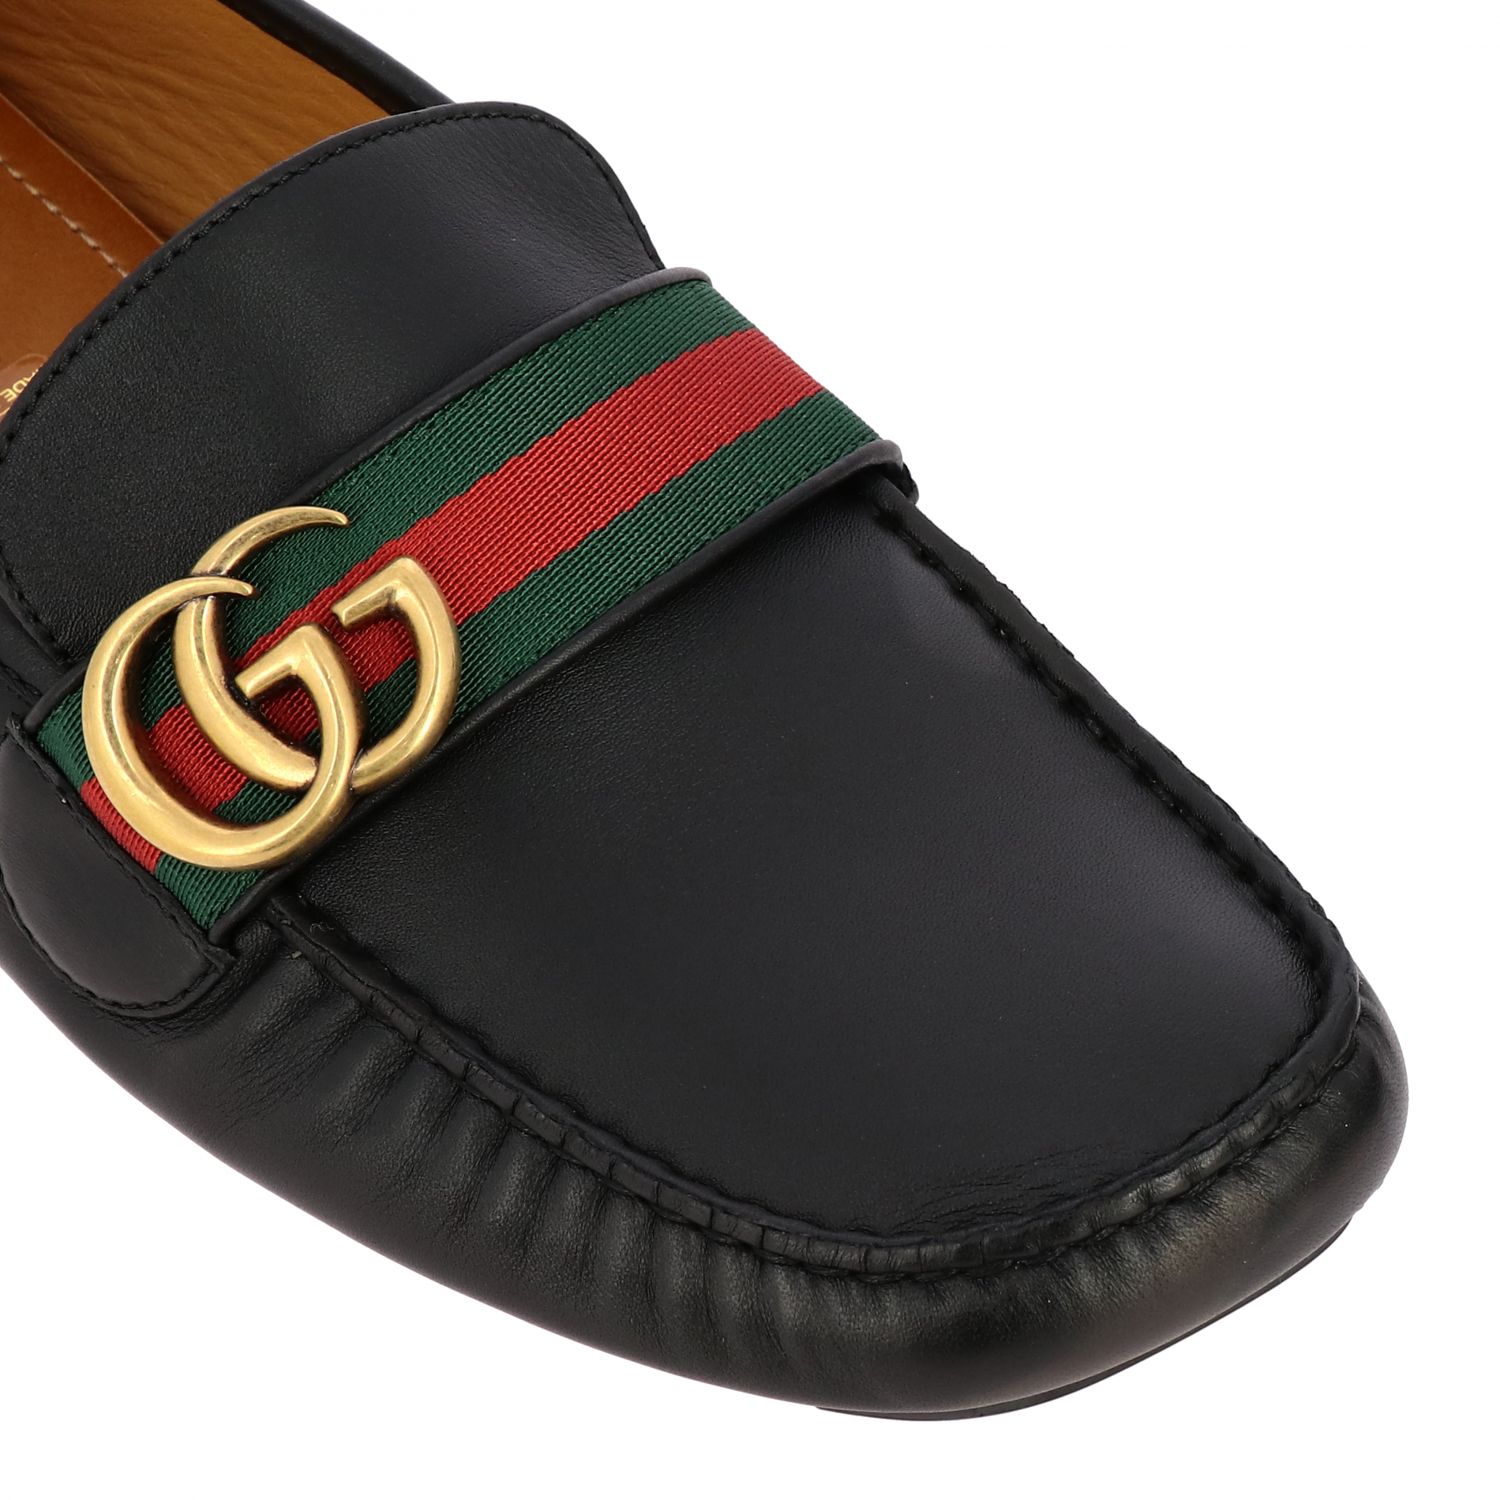 gucci noel moccasin drivers